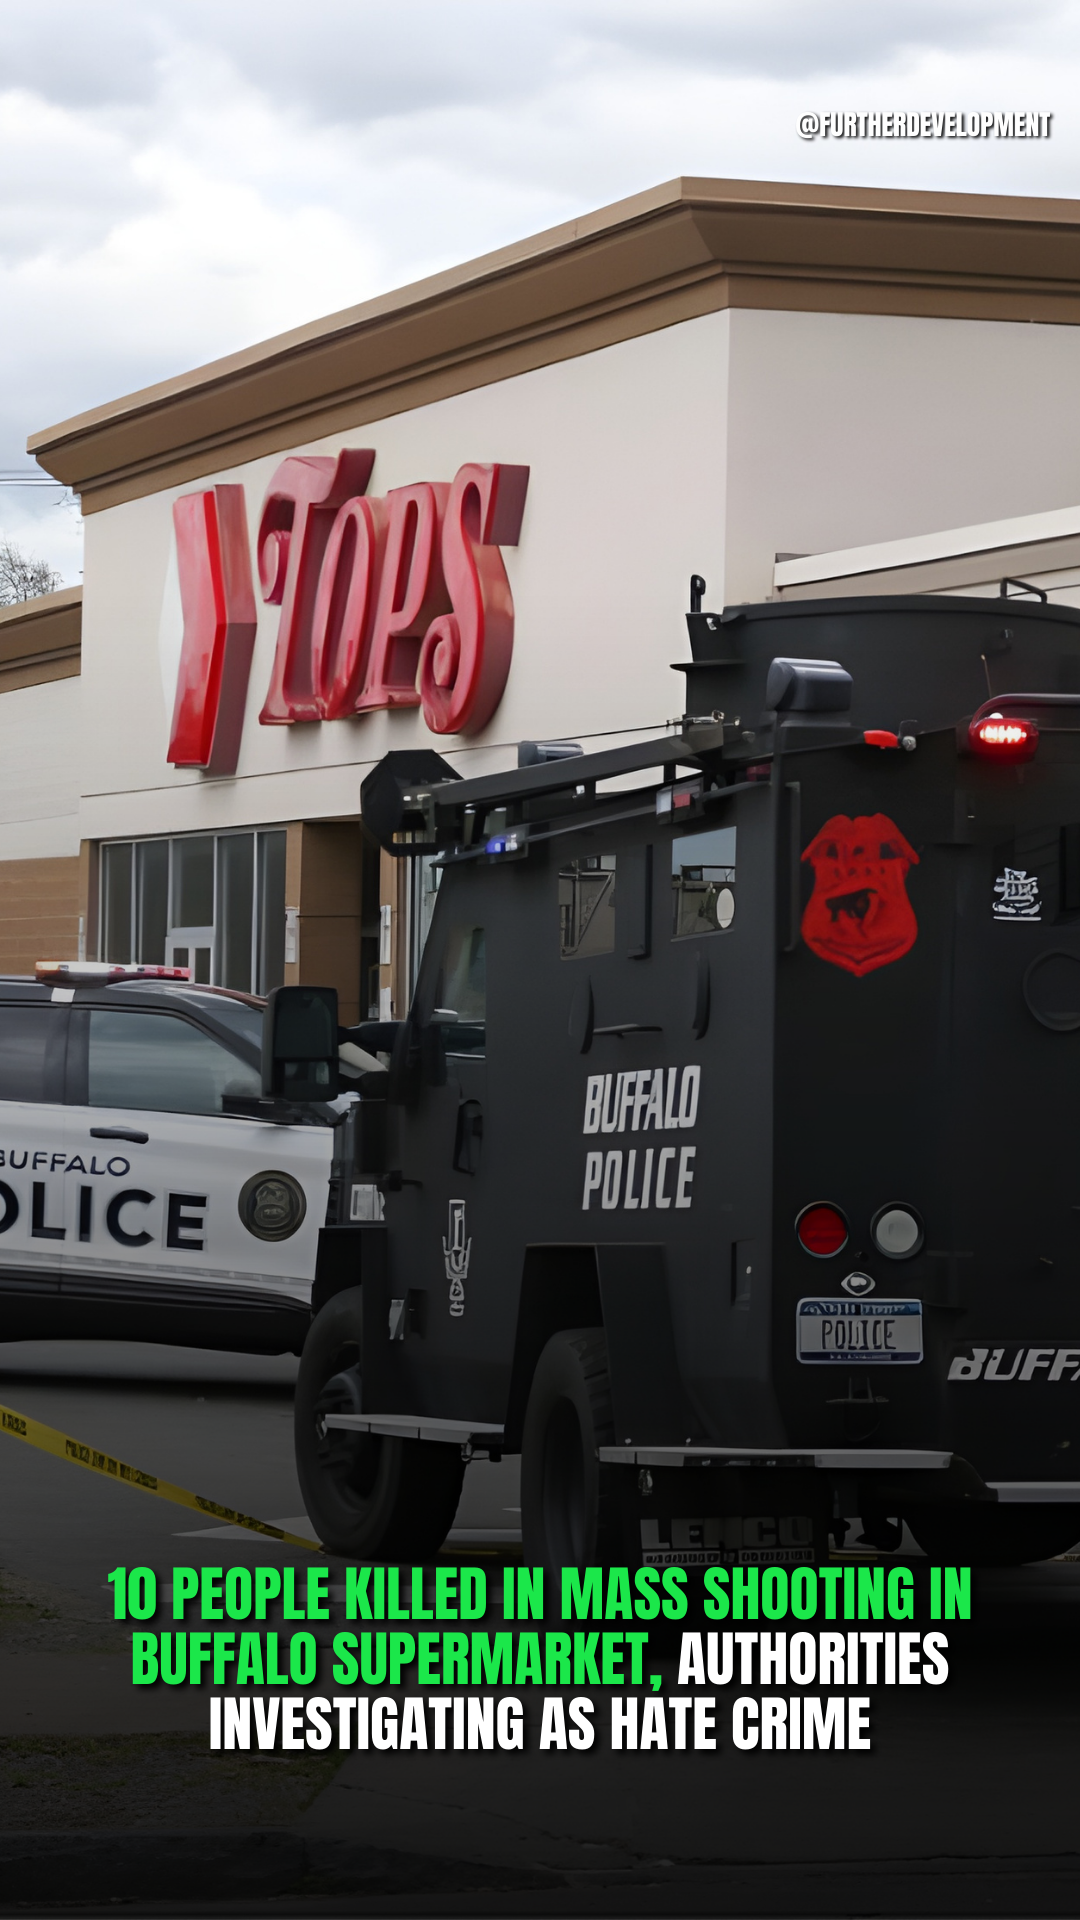 10 people killed in mass shooting in buffalo supermarket, authorities investigating as hate crime